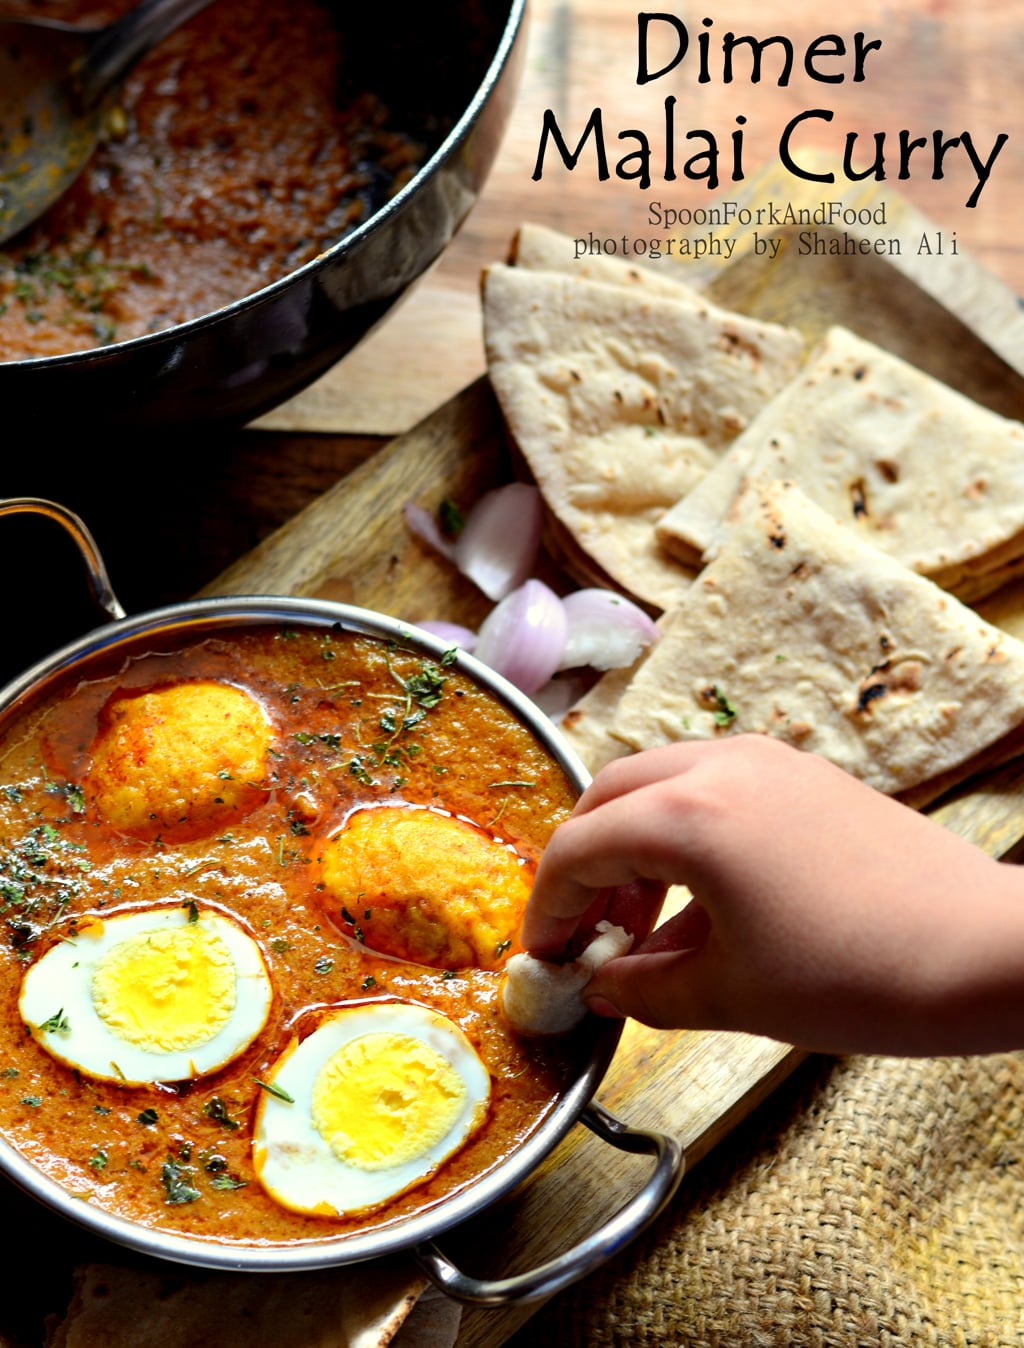 dimer-malai-curry-bengali-style-egg-curry-in-coconut-milk.29041.jpg ...